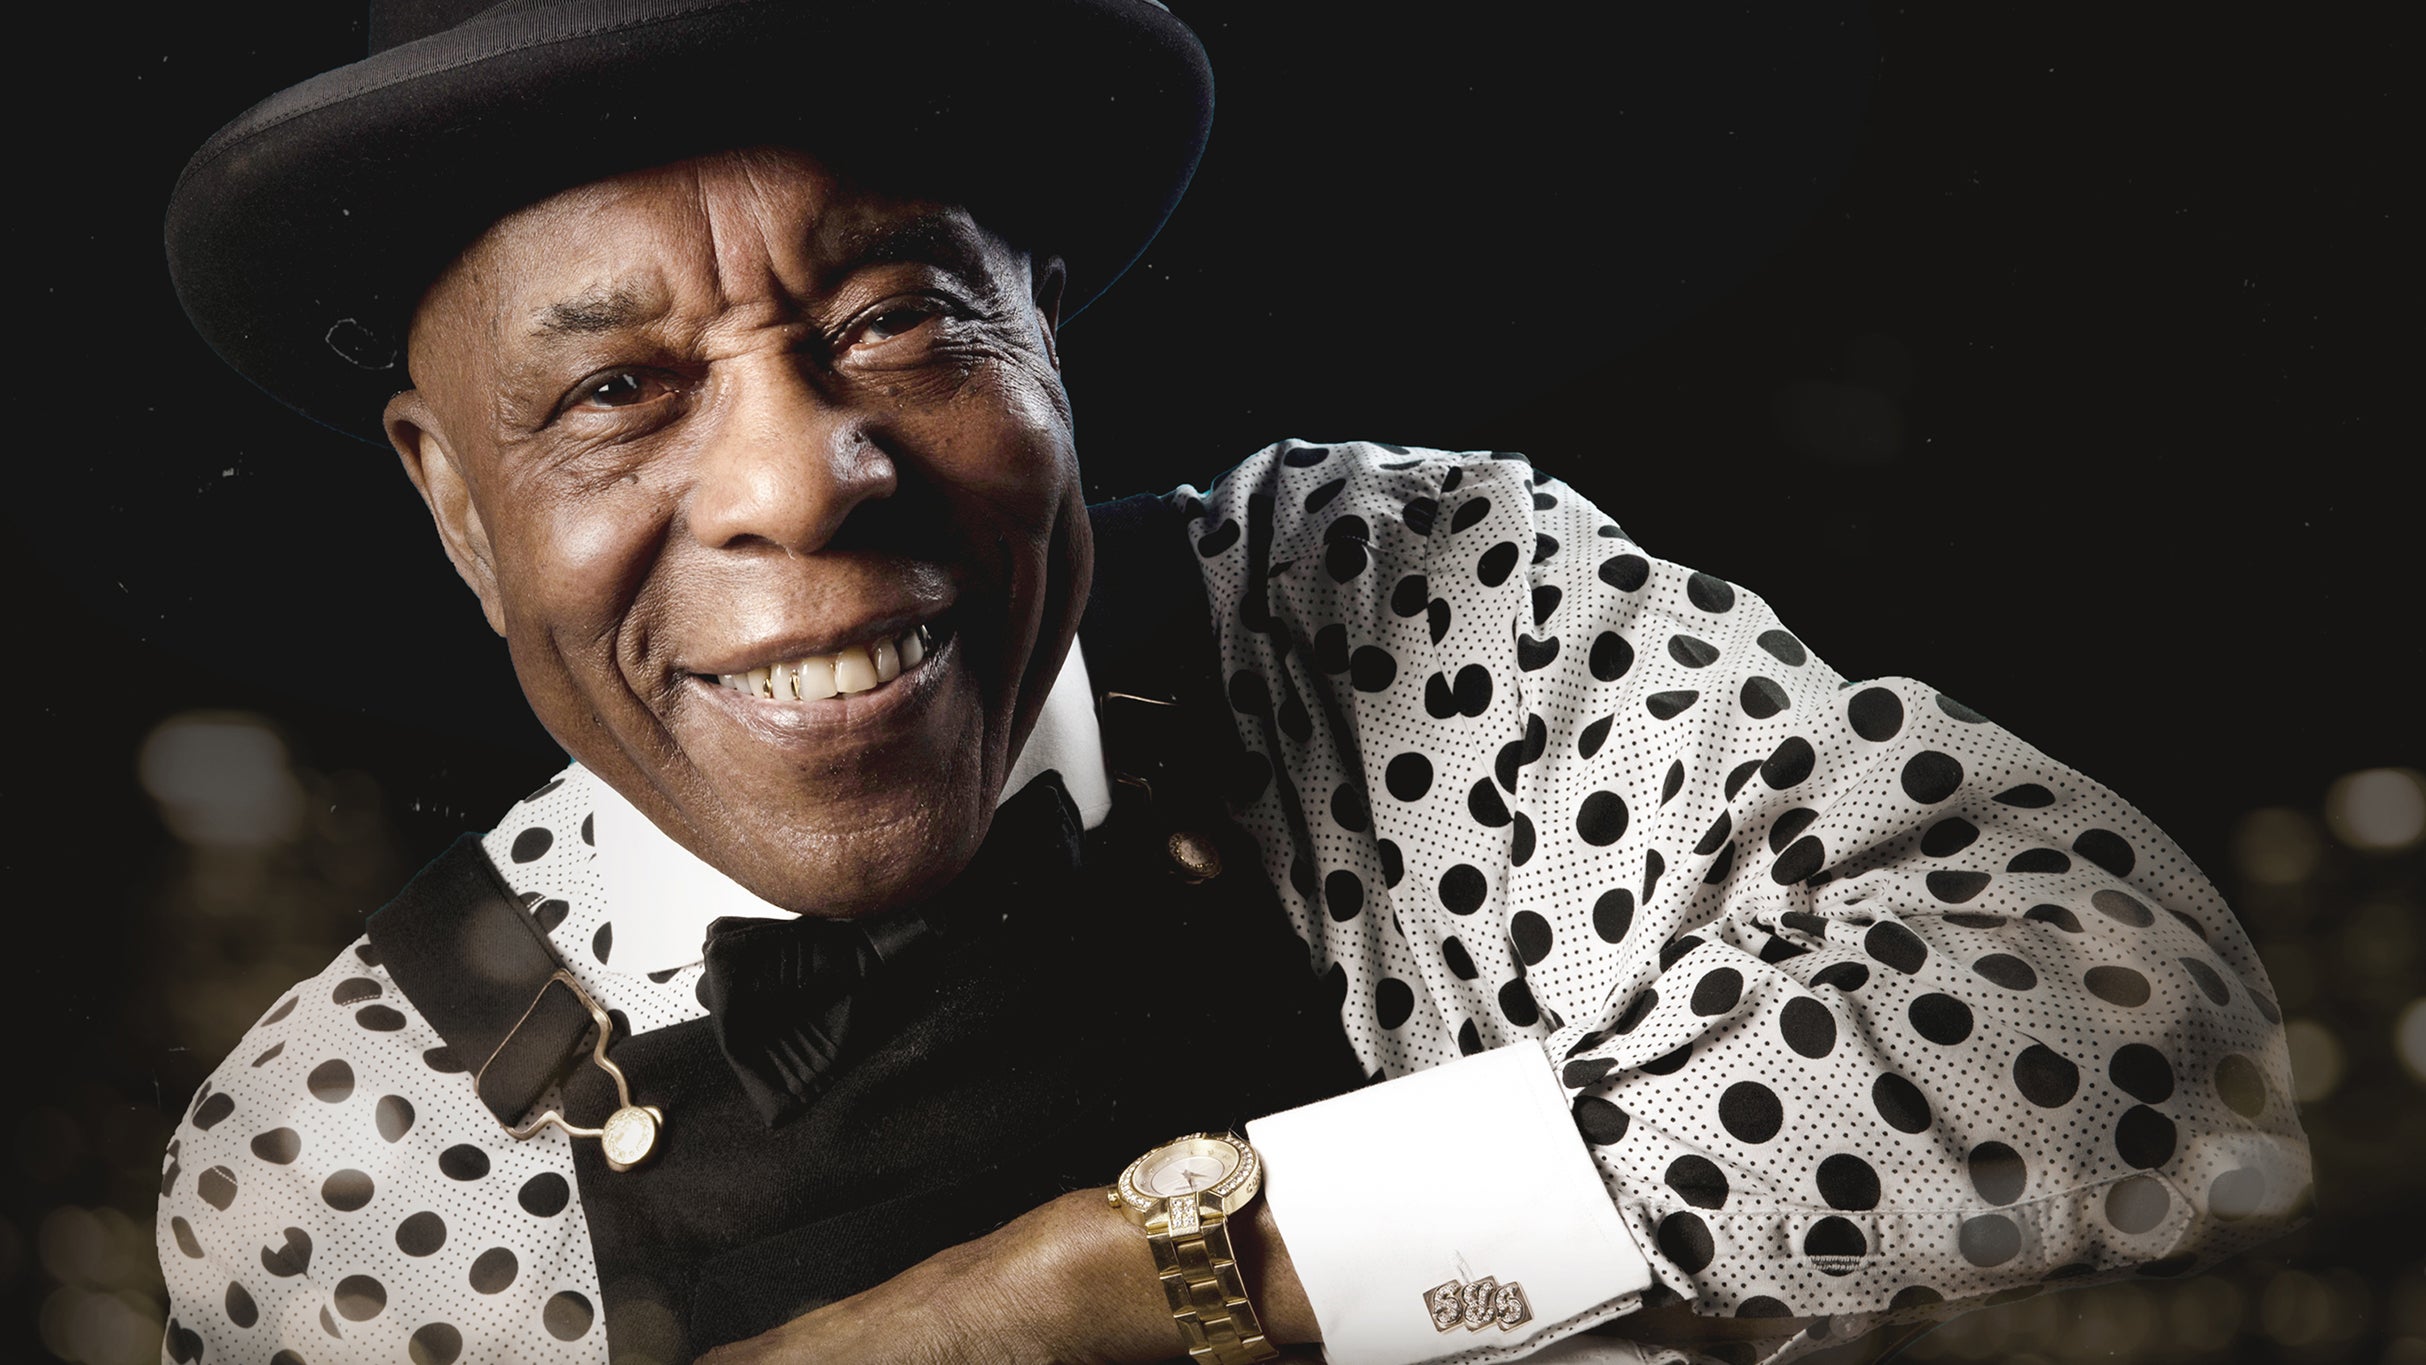 Buddy Guy - Damn Right Farewell with Ally Venable